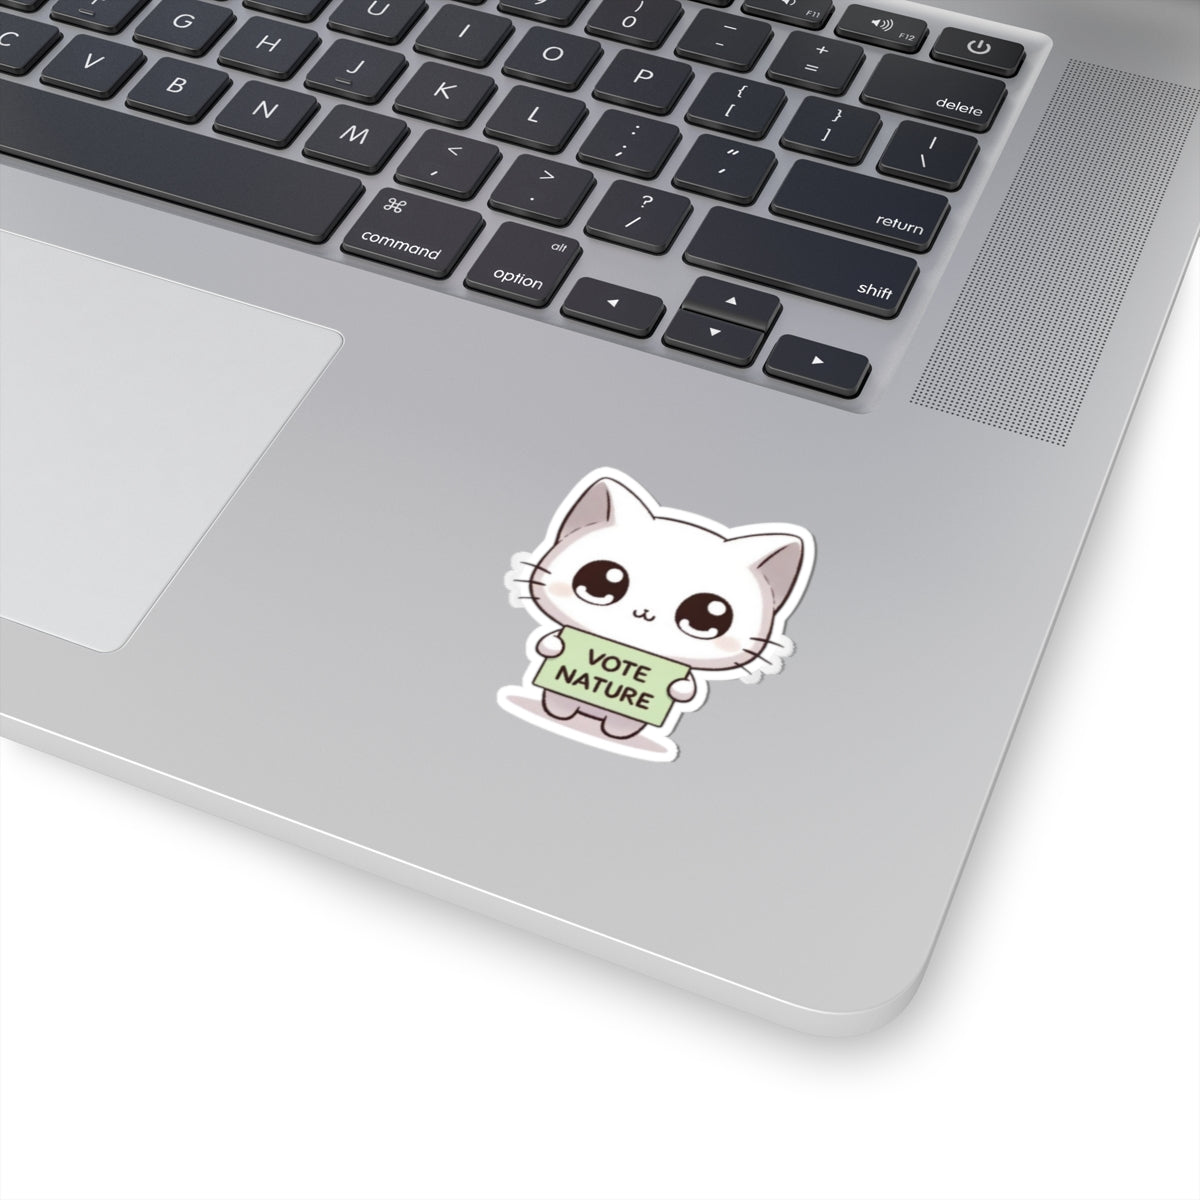 Inspirational Cute Cat Statement vinyl Sticker: Vote Nature! for laptop, kindle, phone, ipad, instrument case, notebook, mood board, or wall